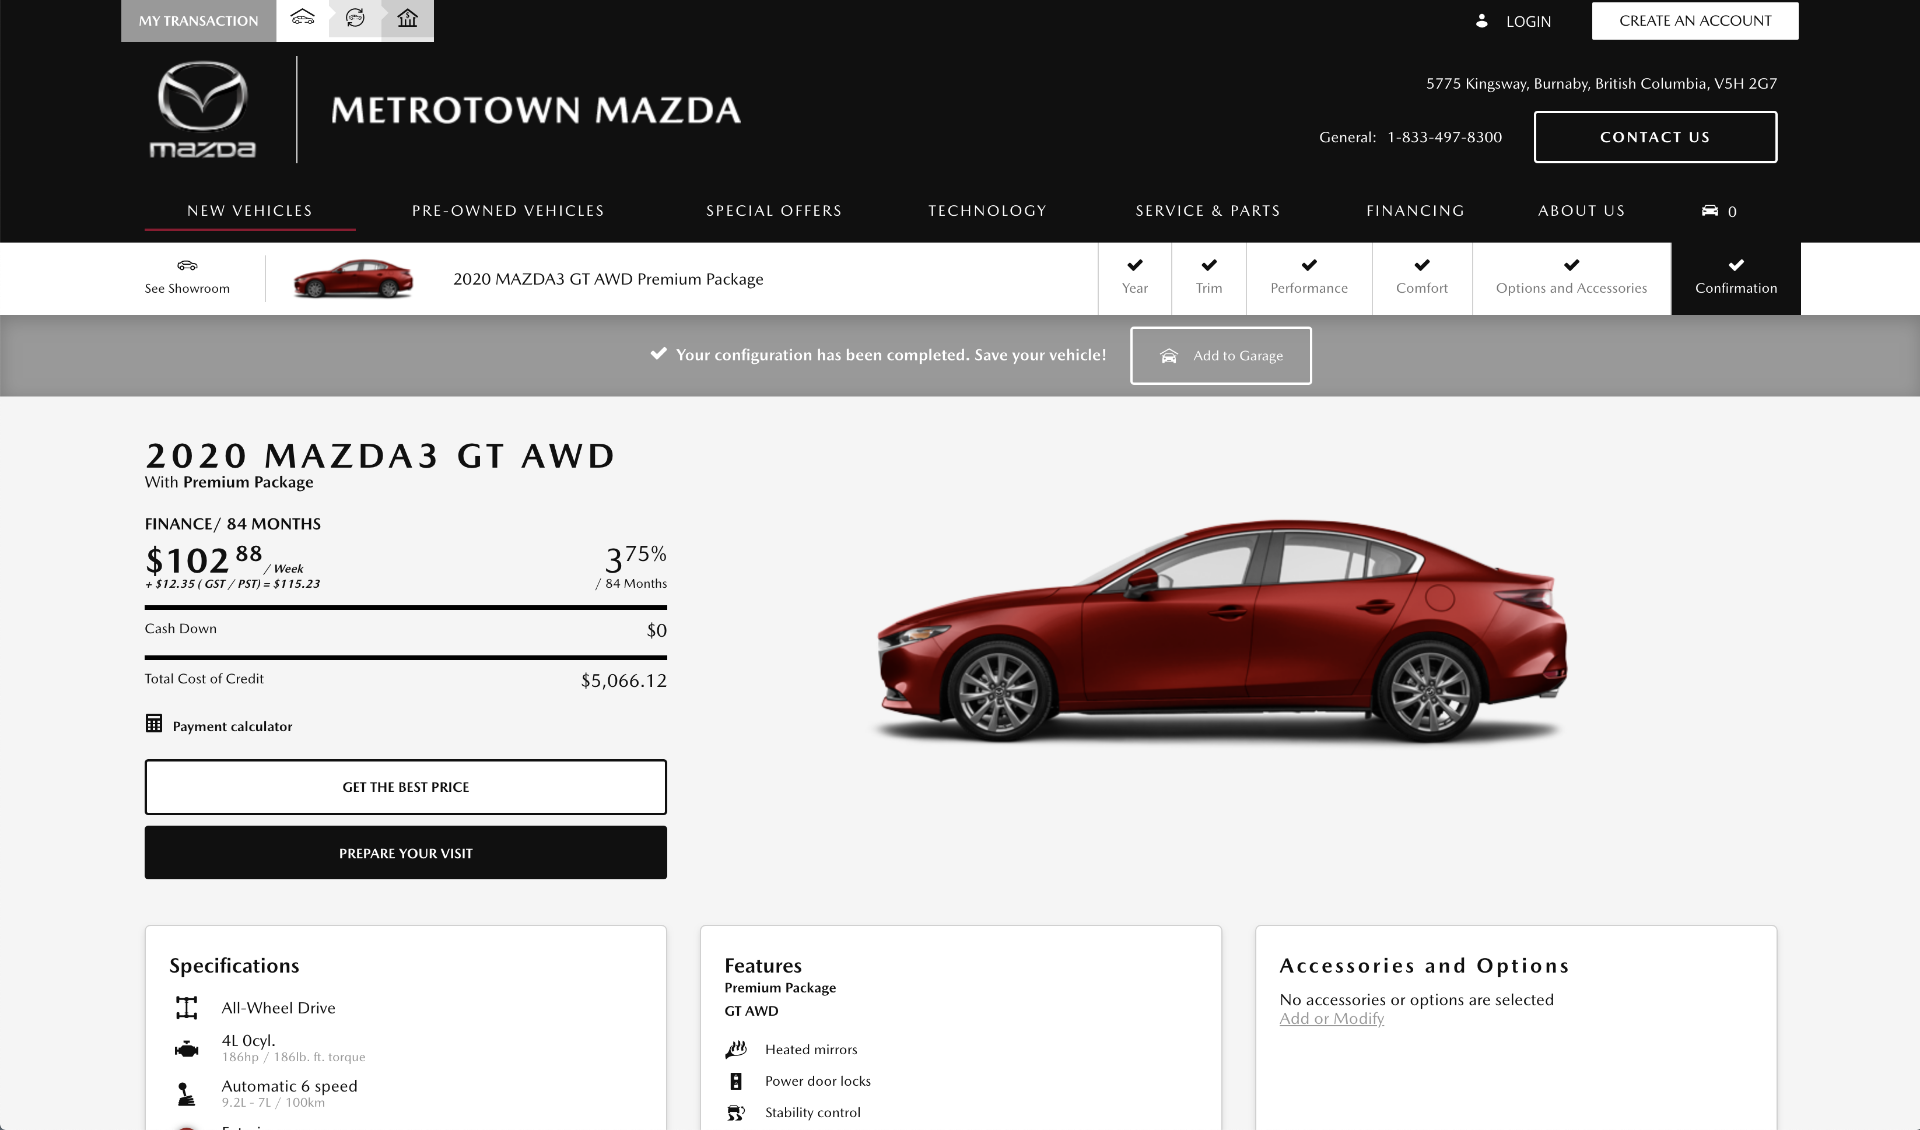 Buying a new Mazda vehicle 100% online is easier than you think